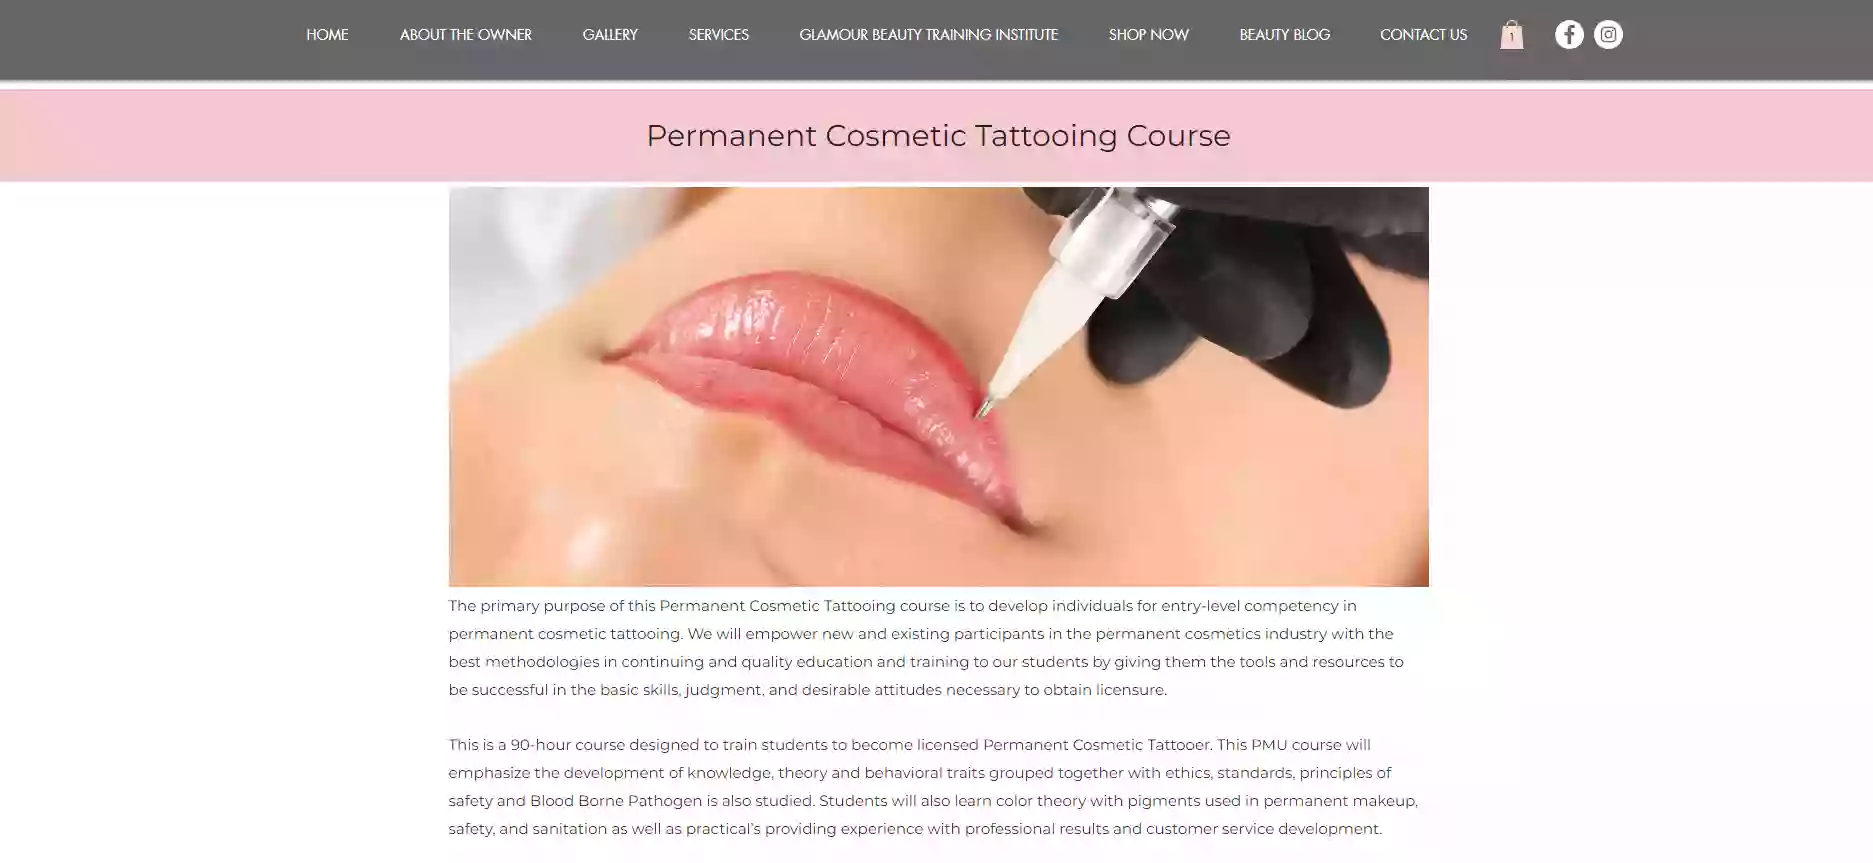 Glamour Beauty and Brows Training Institute